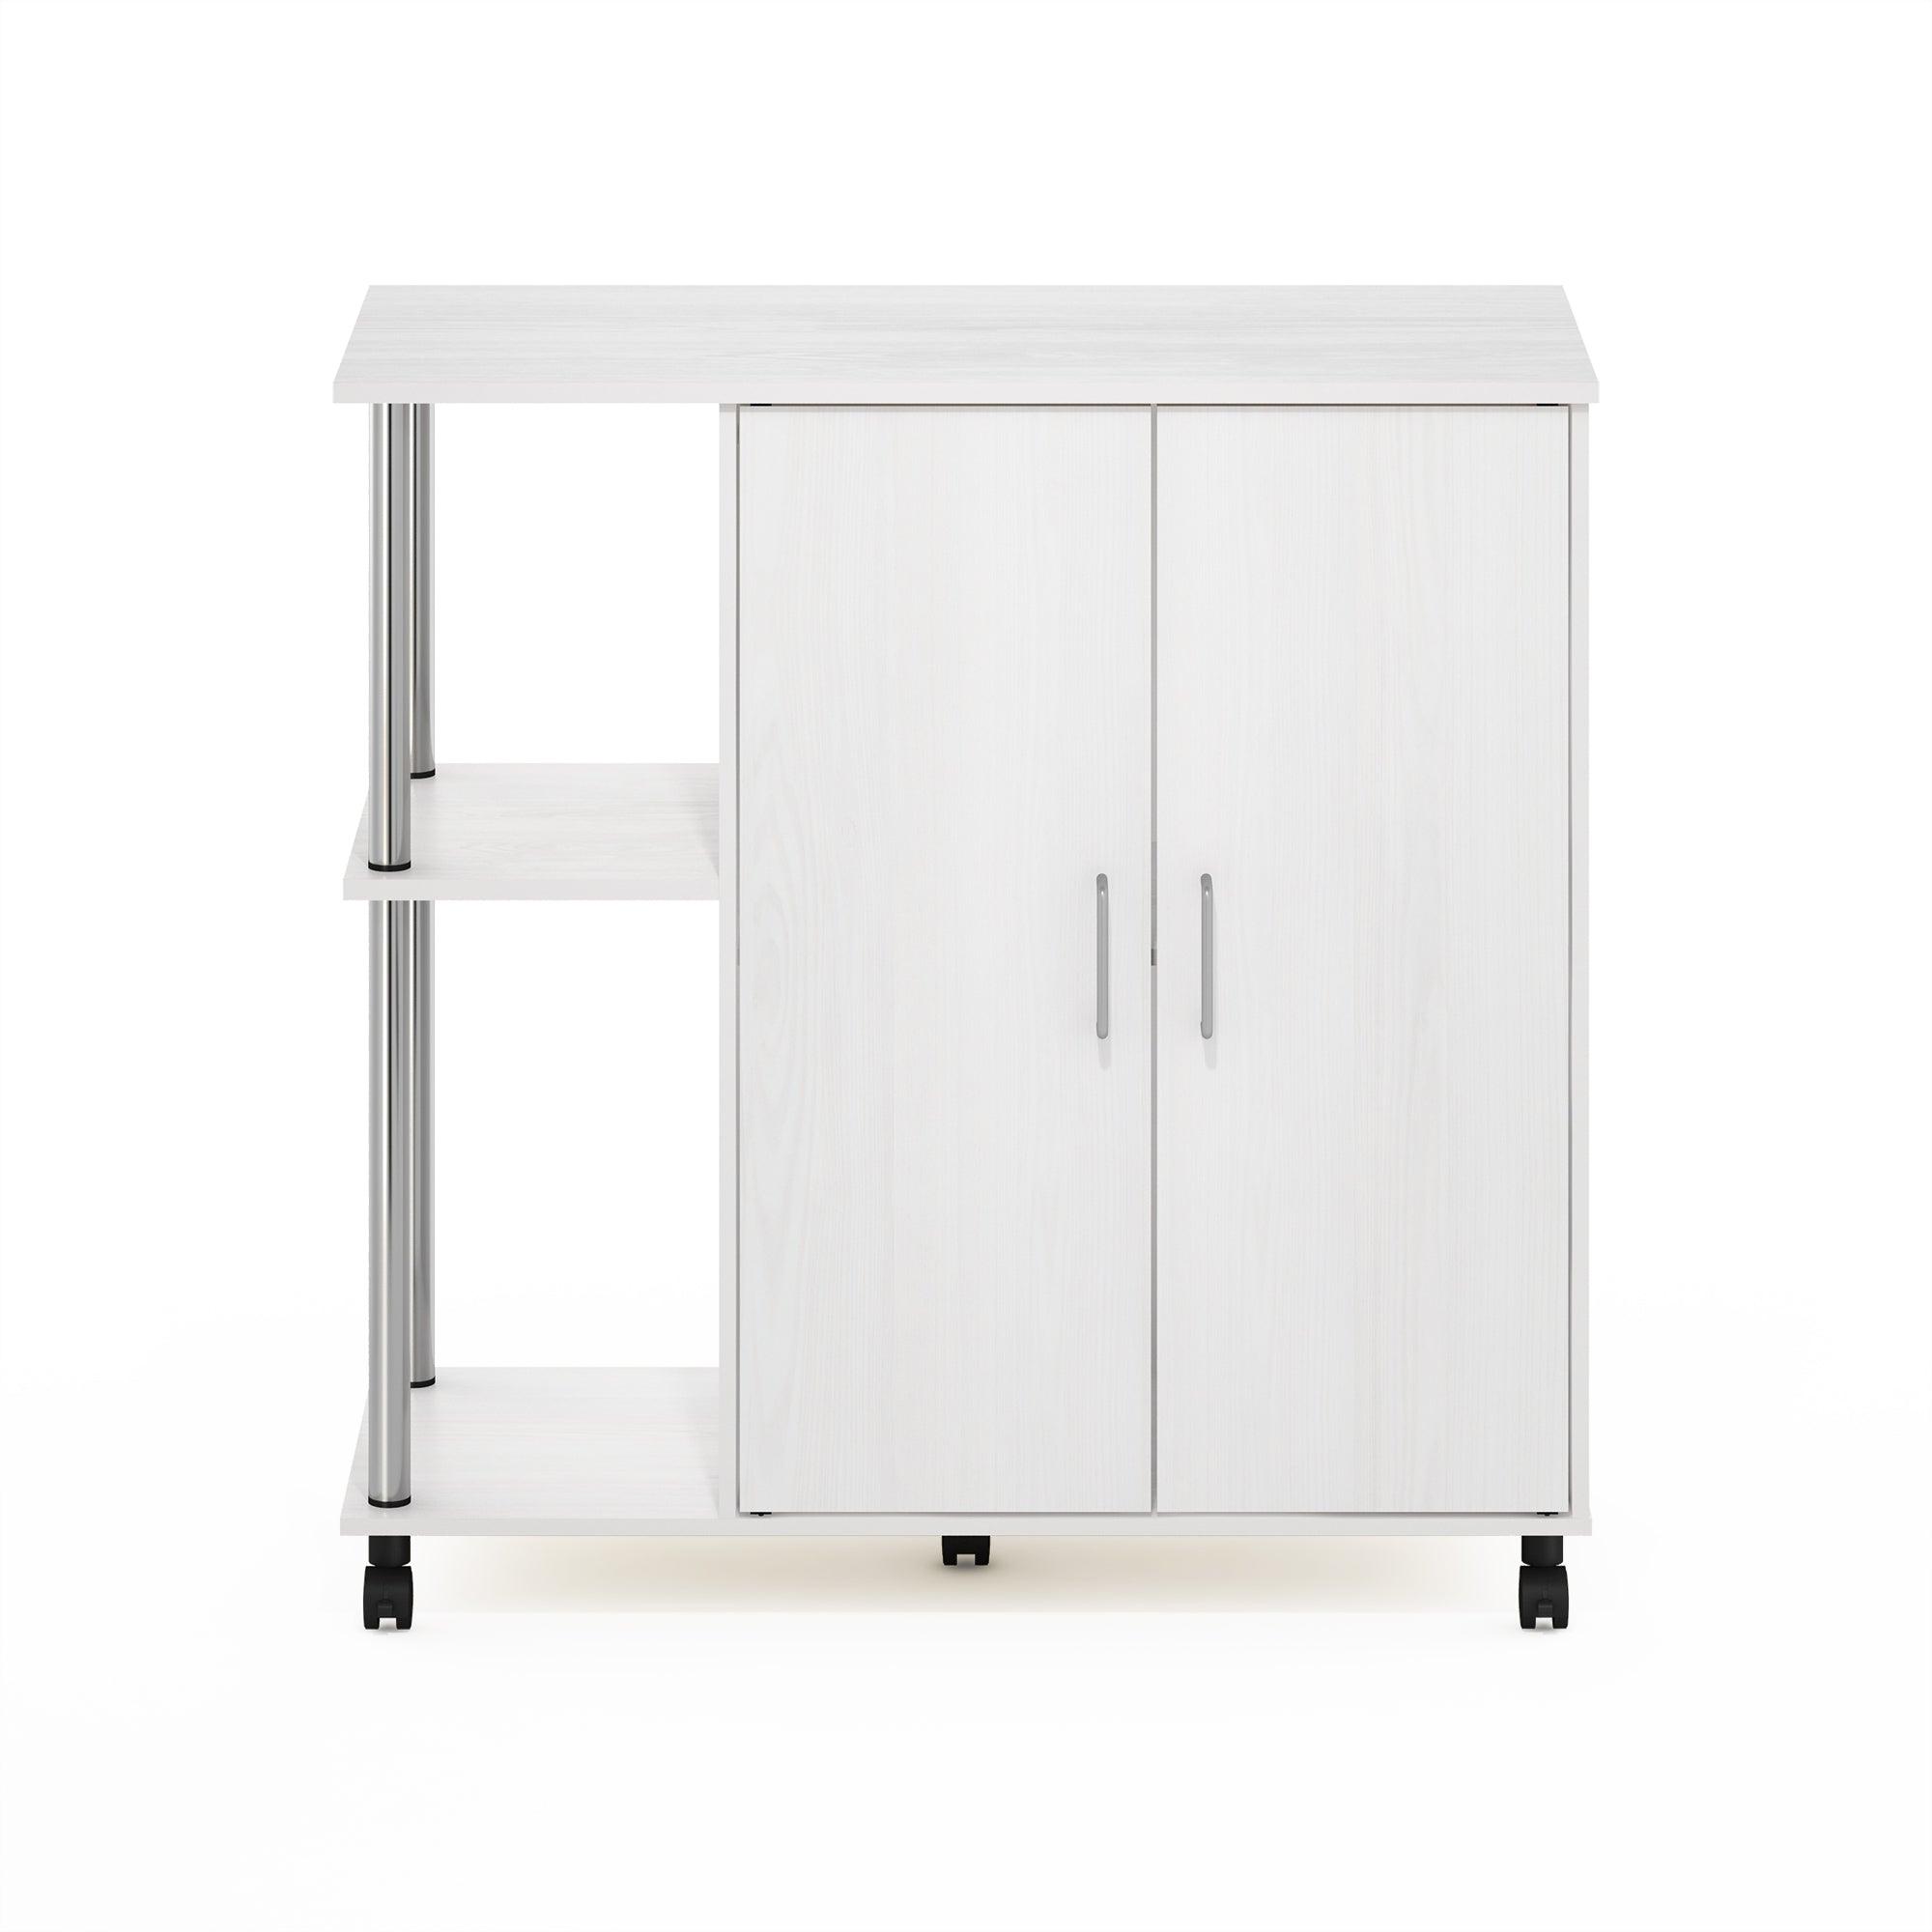 Furinno Helena 3-Tier Utility Kitchen Island and Storage Cart on wheels with Stainless Steel Tubes， White Oak/Chrome